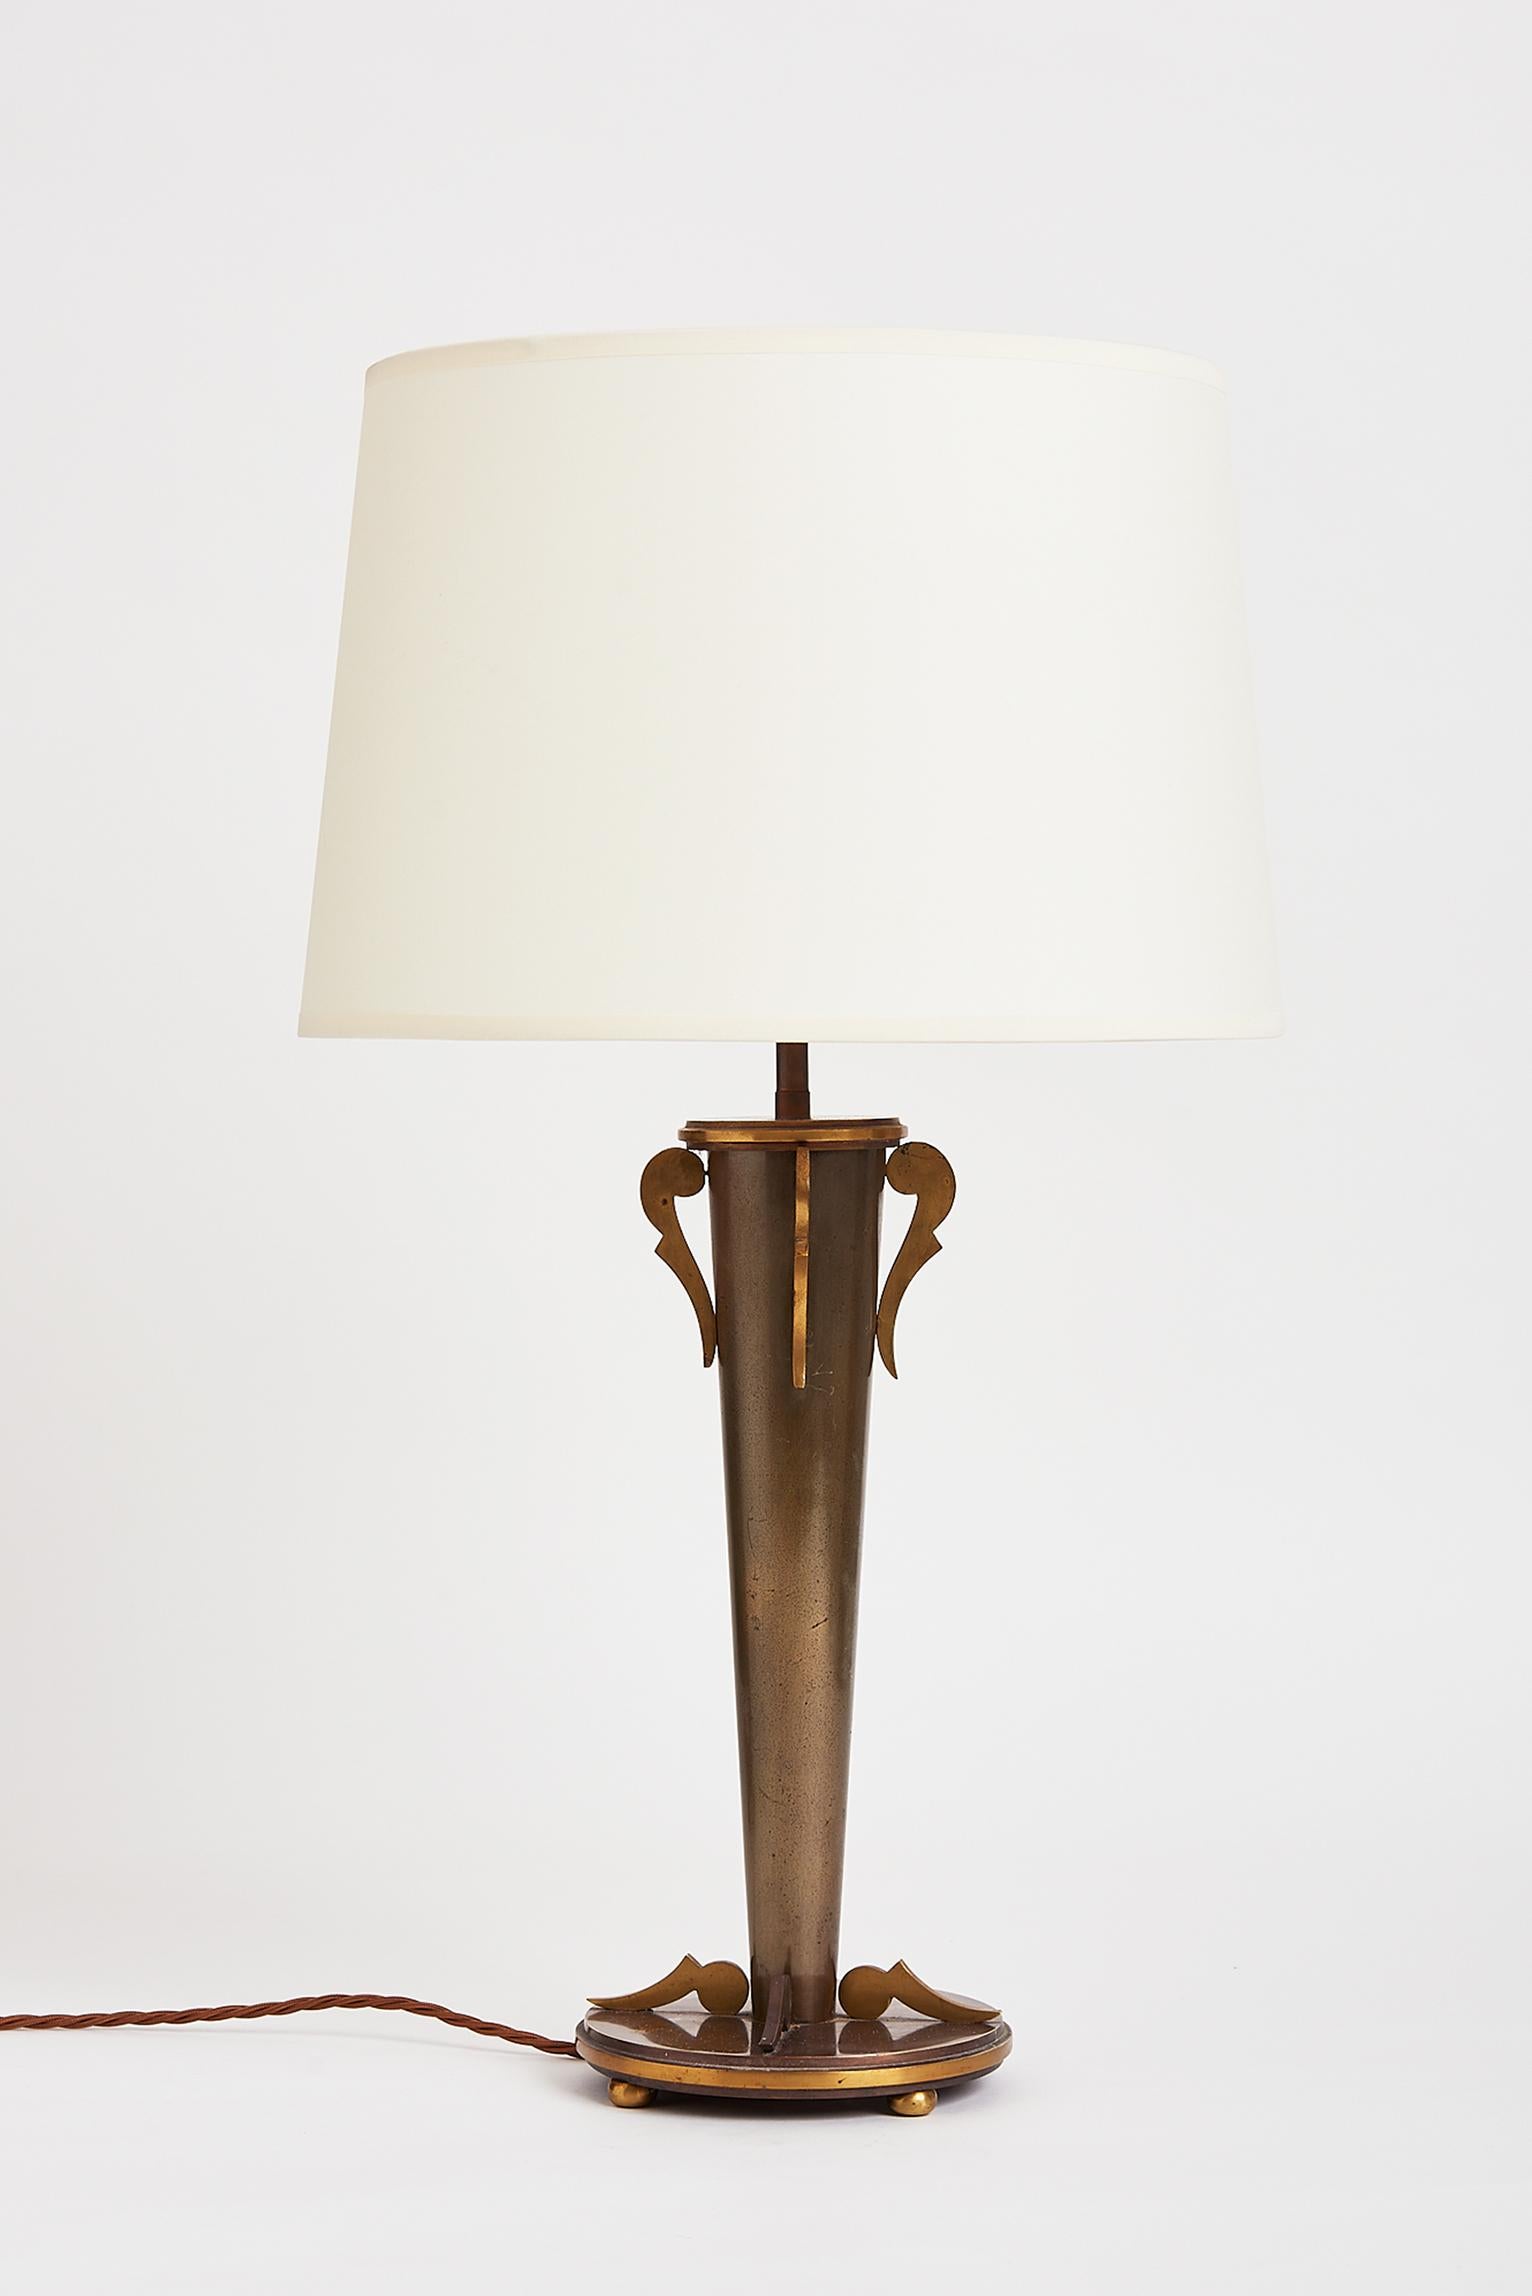 An Art Deco brass and gunmetal table lamp.
France, circa 1930.
With the shade: 63 cm high by 36 cm diameter.
Table base only: 44 cm tall by 16 cm diameter.